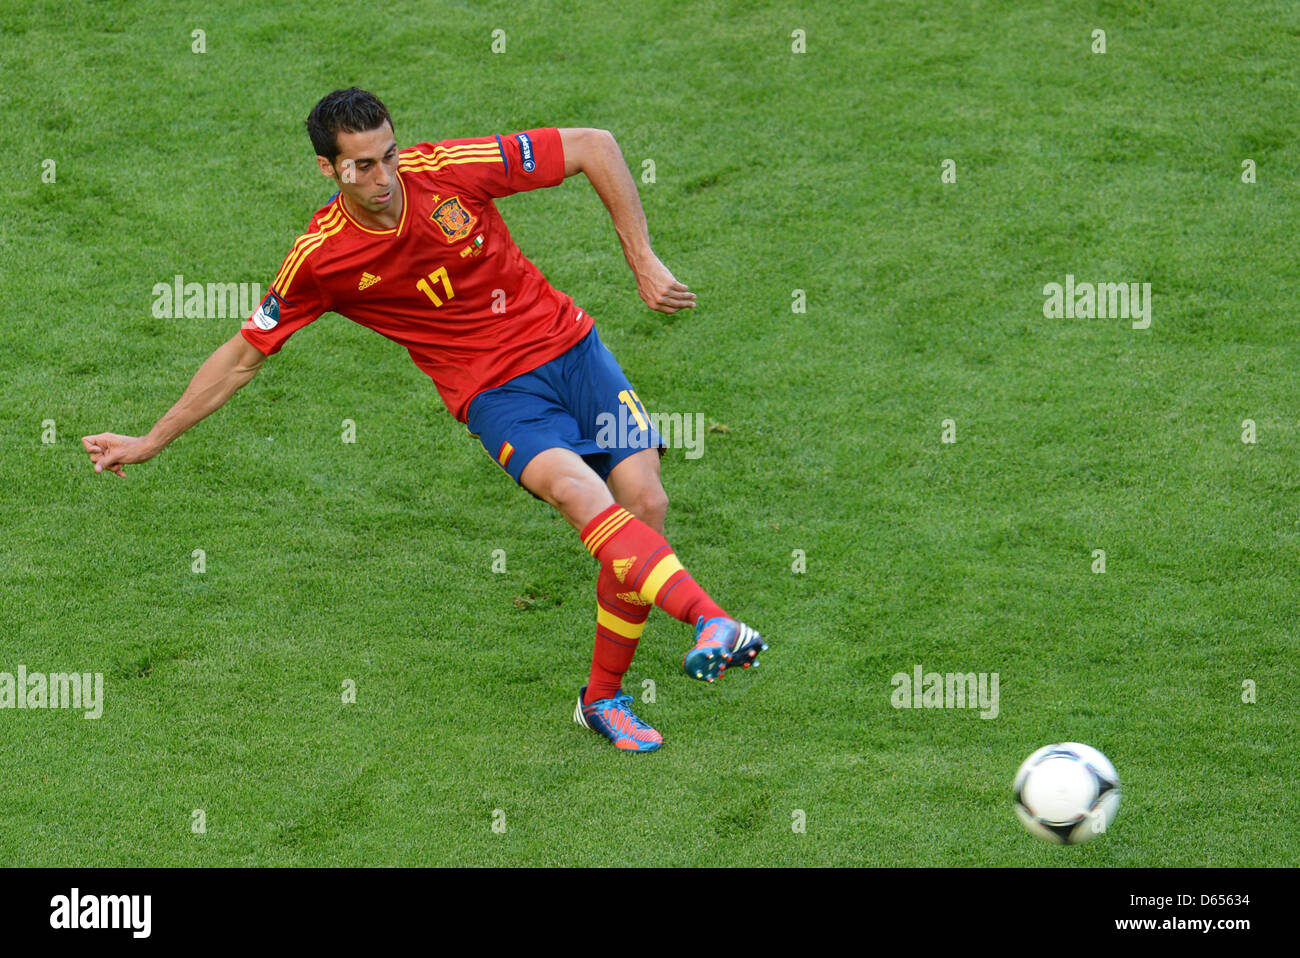 Spain's Alvaro Arbeloa passes the ball during UEFA EURO 2012 group C soccer match Spain vs Italy at Arena Gdansk in Gdansk, Poland, 10 June 2012. Photo: Andreas Gebert dpa (Please refer to chapters 7 and 8 of http://dpaq.de/Ziovh for UEFA Euro 2012 Terms & Conditions) Stock Photo